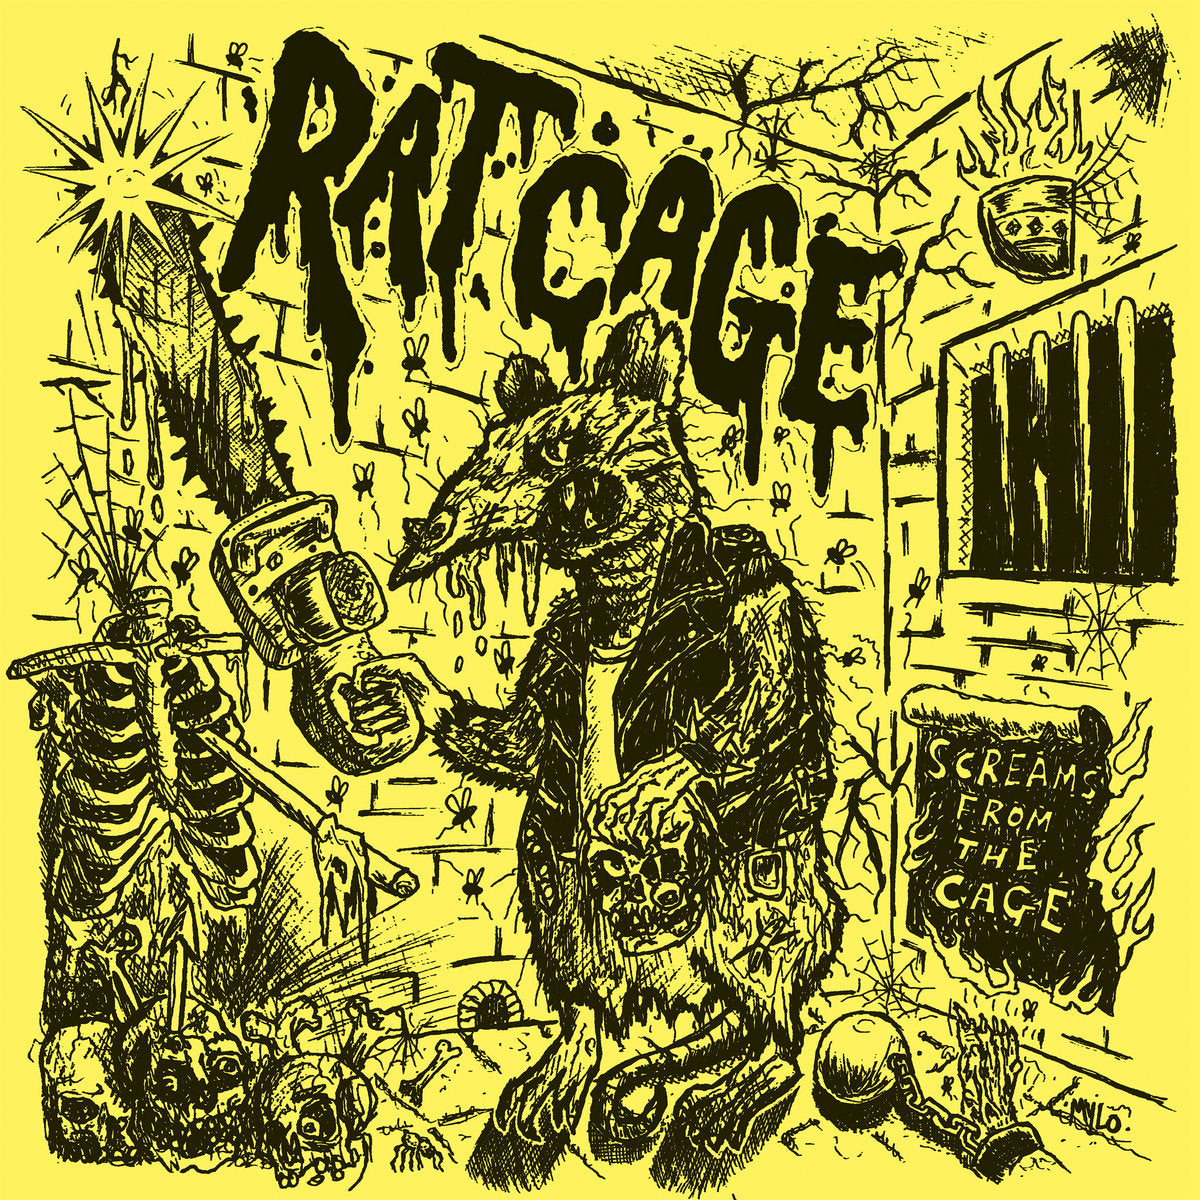 RAT CAGE - SCREAMS FROM THE CAGE Vinyl LP